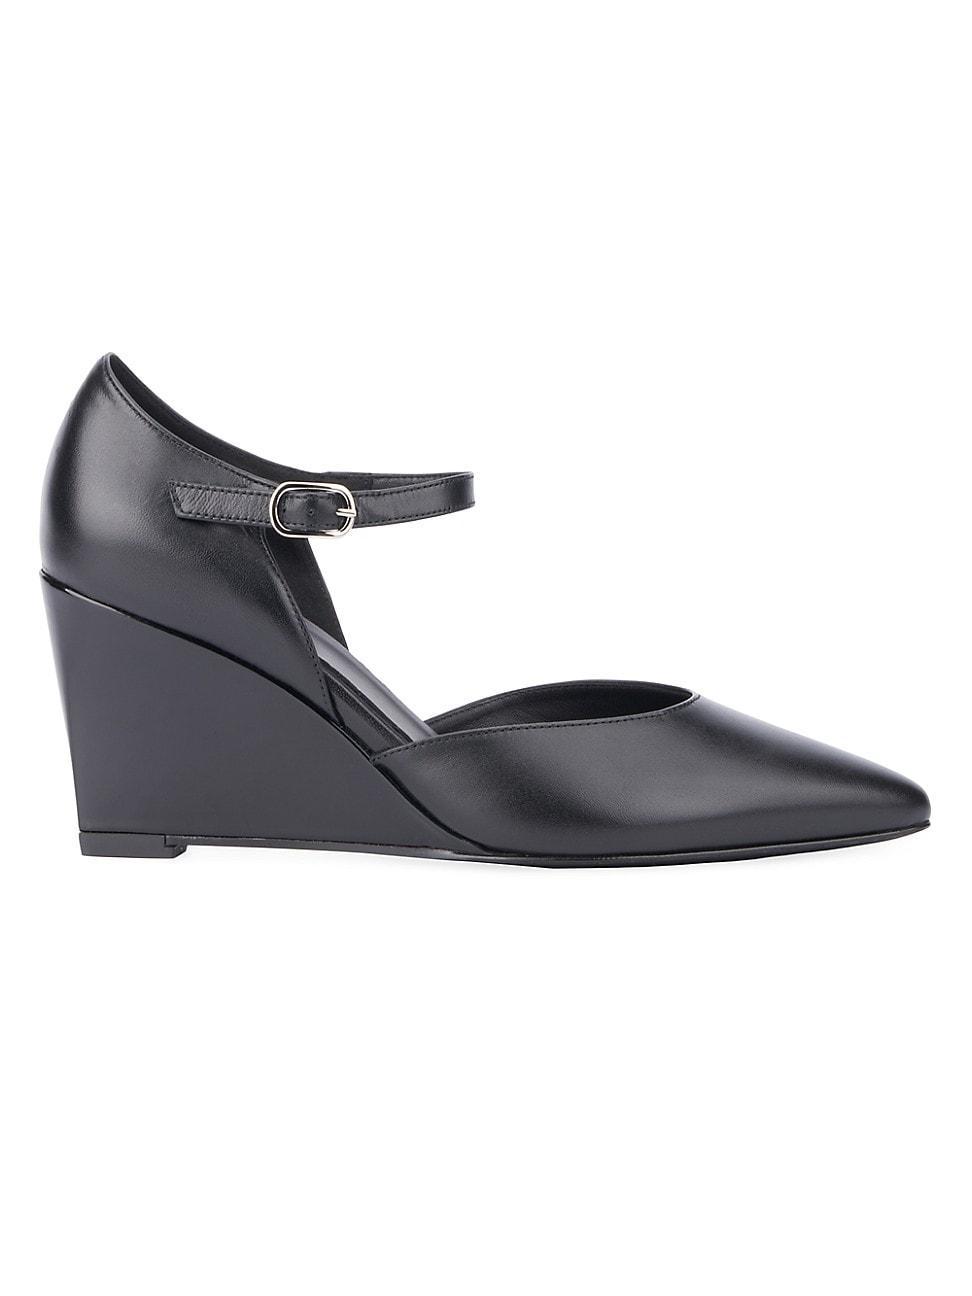 Womens Penelopy 73MM Leather Wedge Pumps Product Image